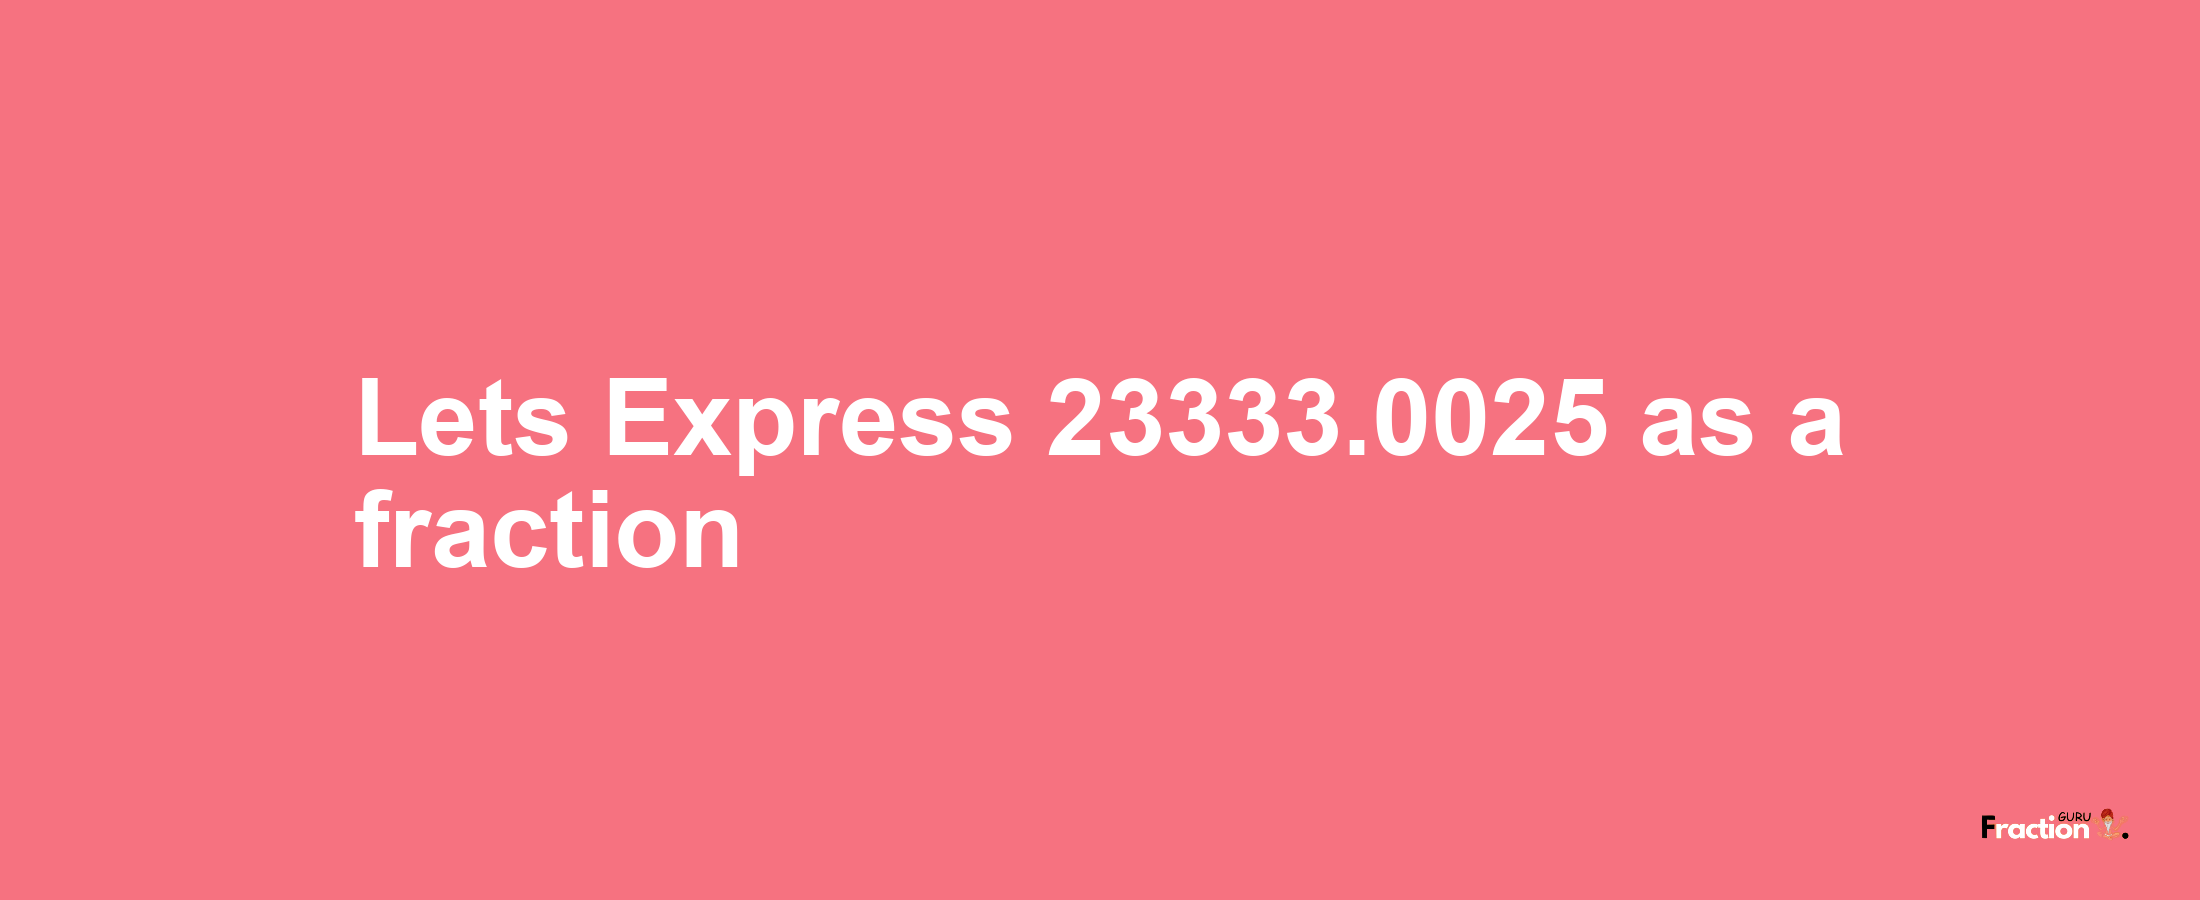 Lets Express 23333.0025 as afraction